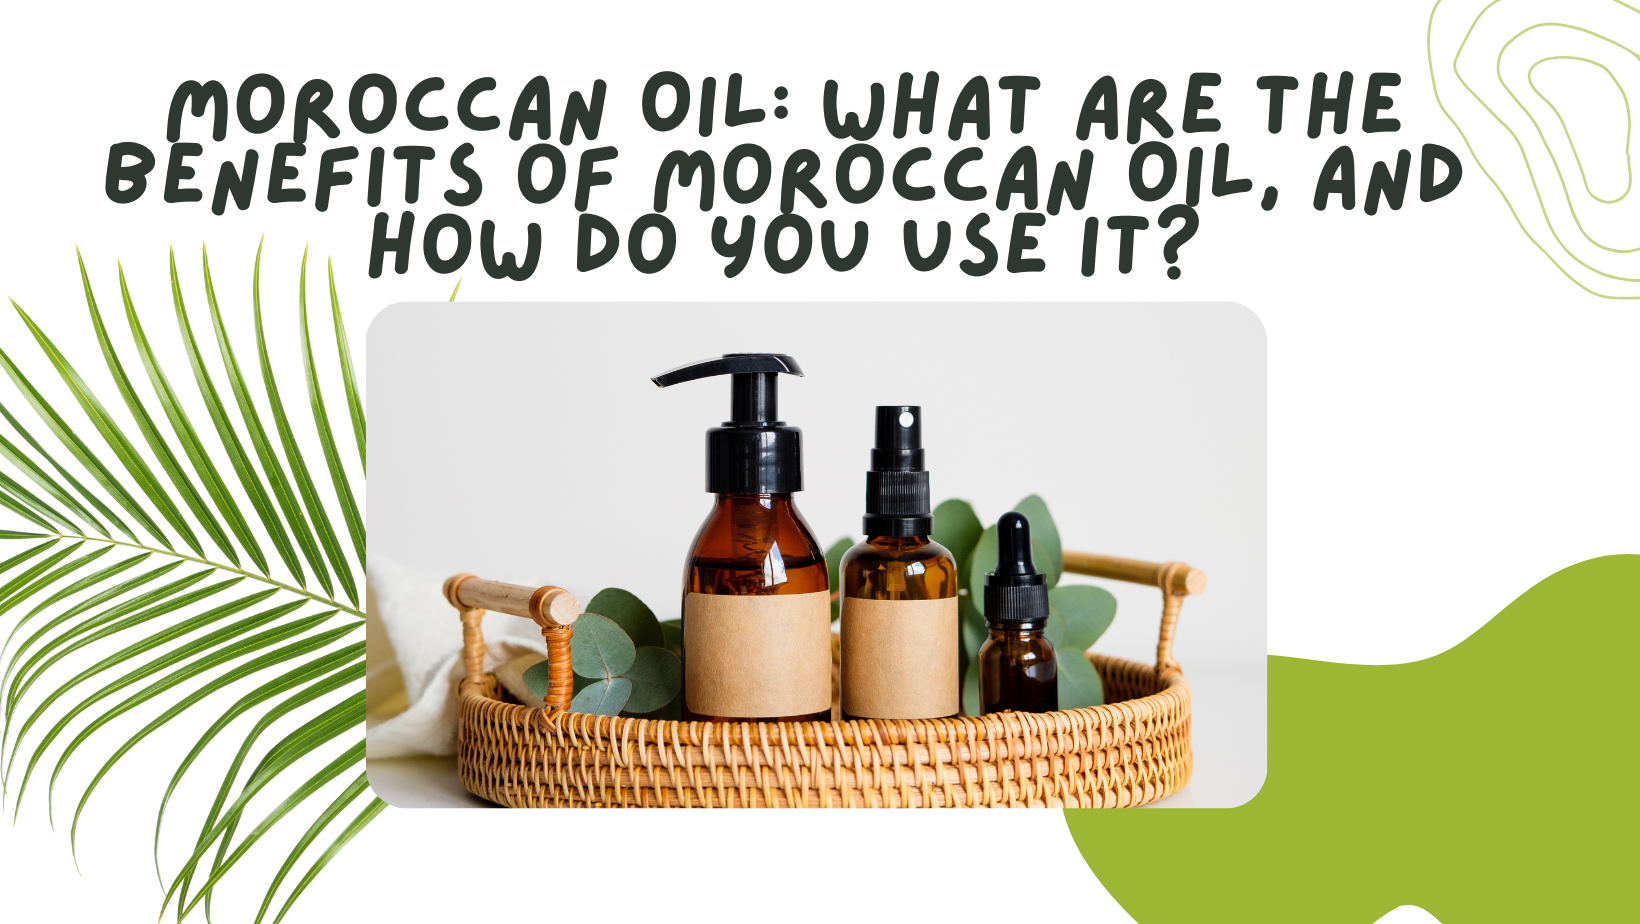 You are currently viewing Moroccan Oil: What Are the Benefits of Moroccan Oil, and How Do You Use It?